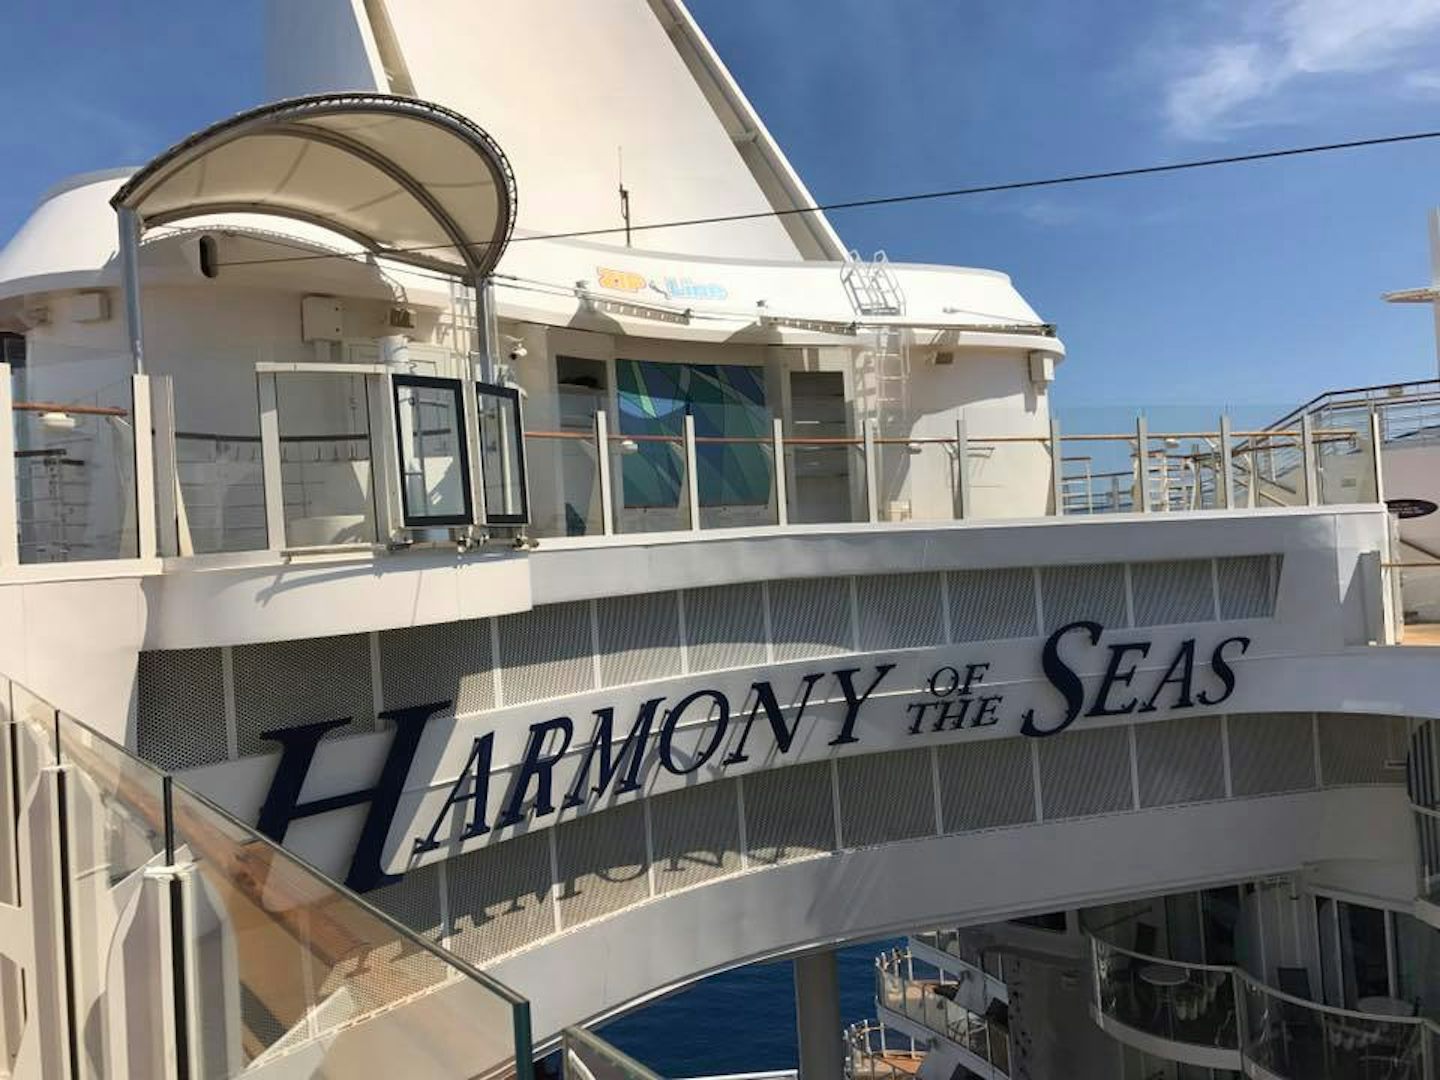 Deck of the Harmony....just wonderful service.